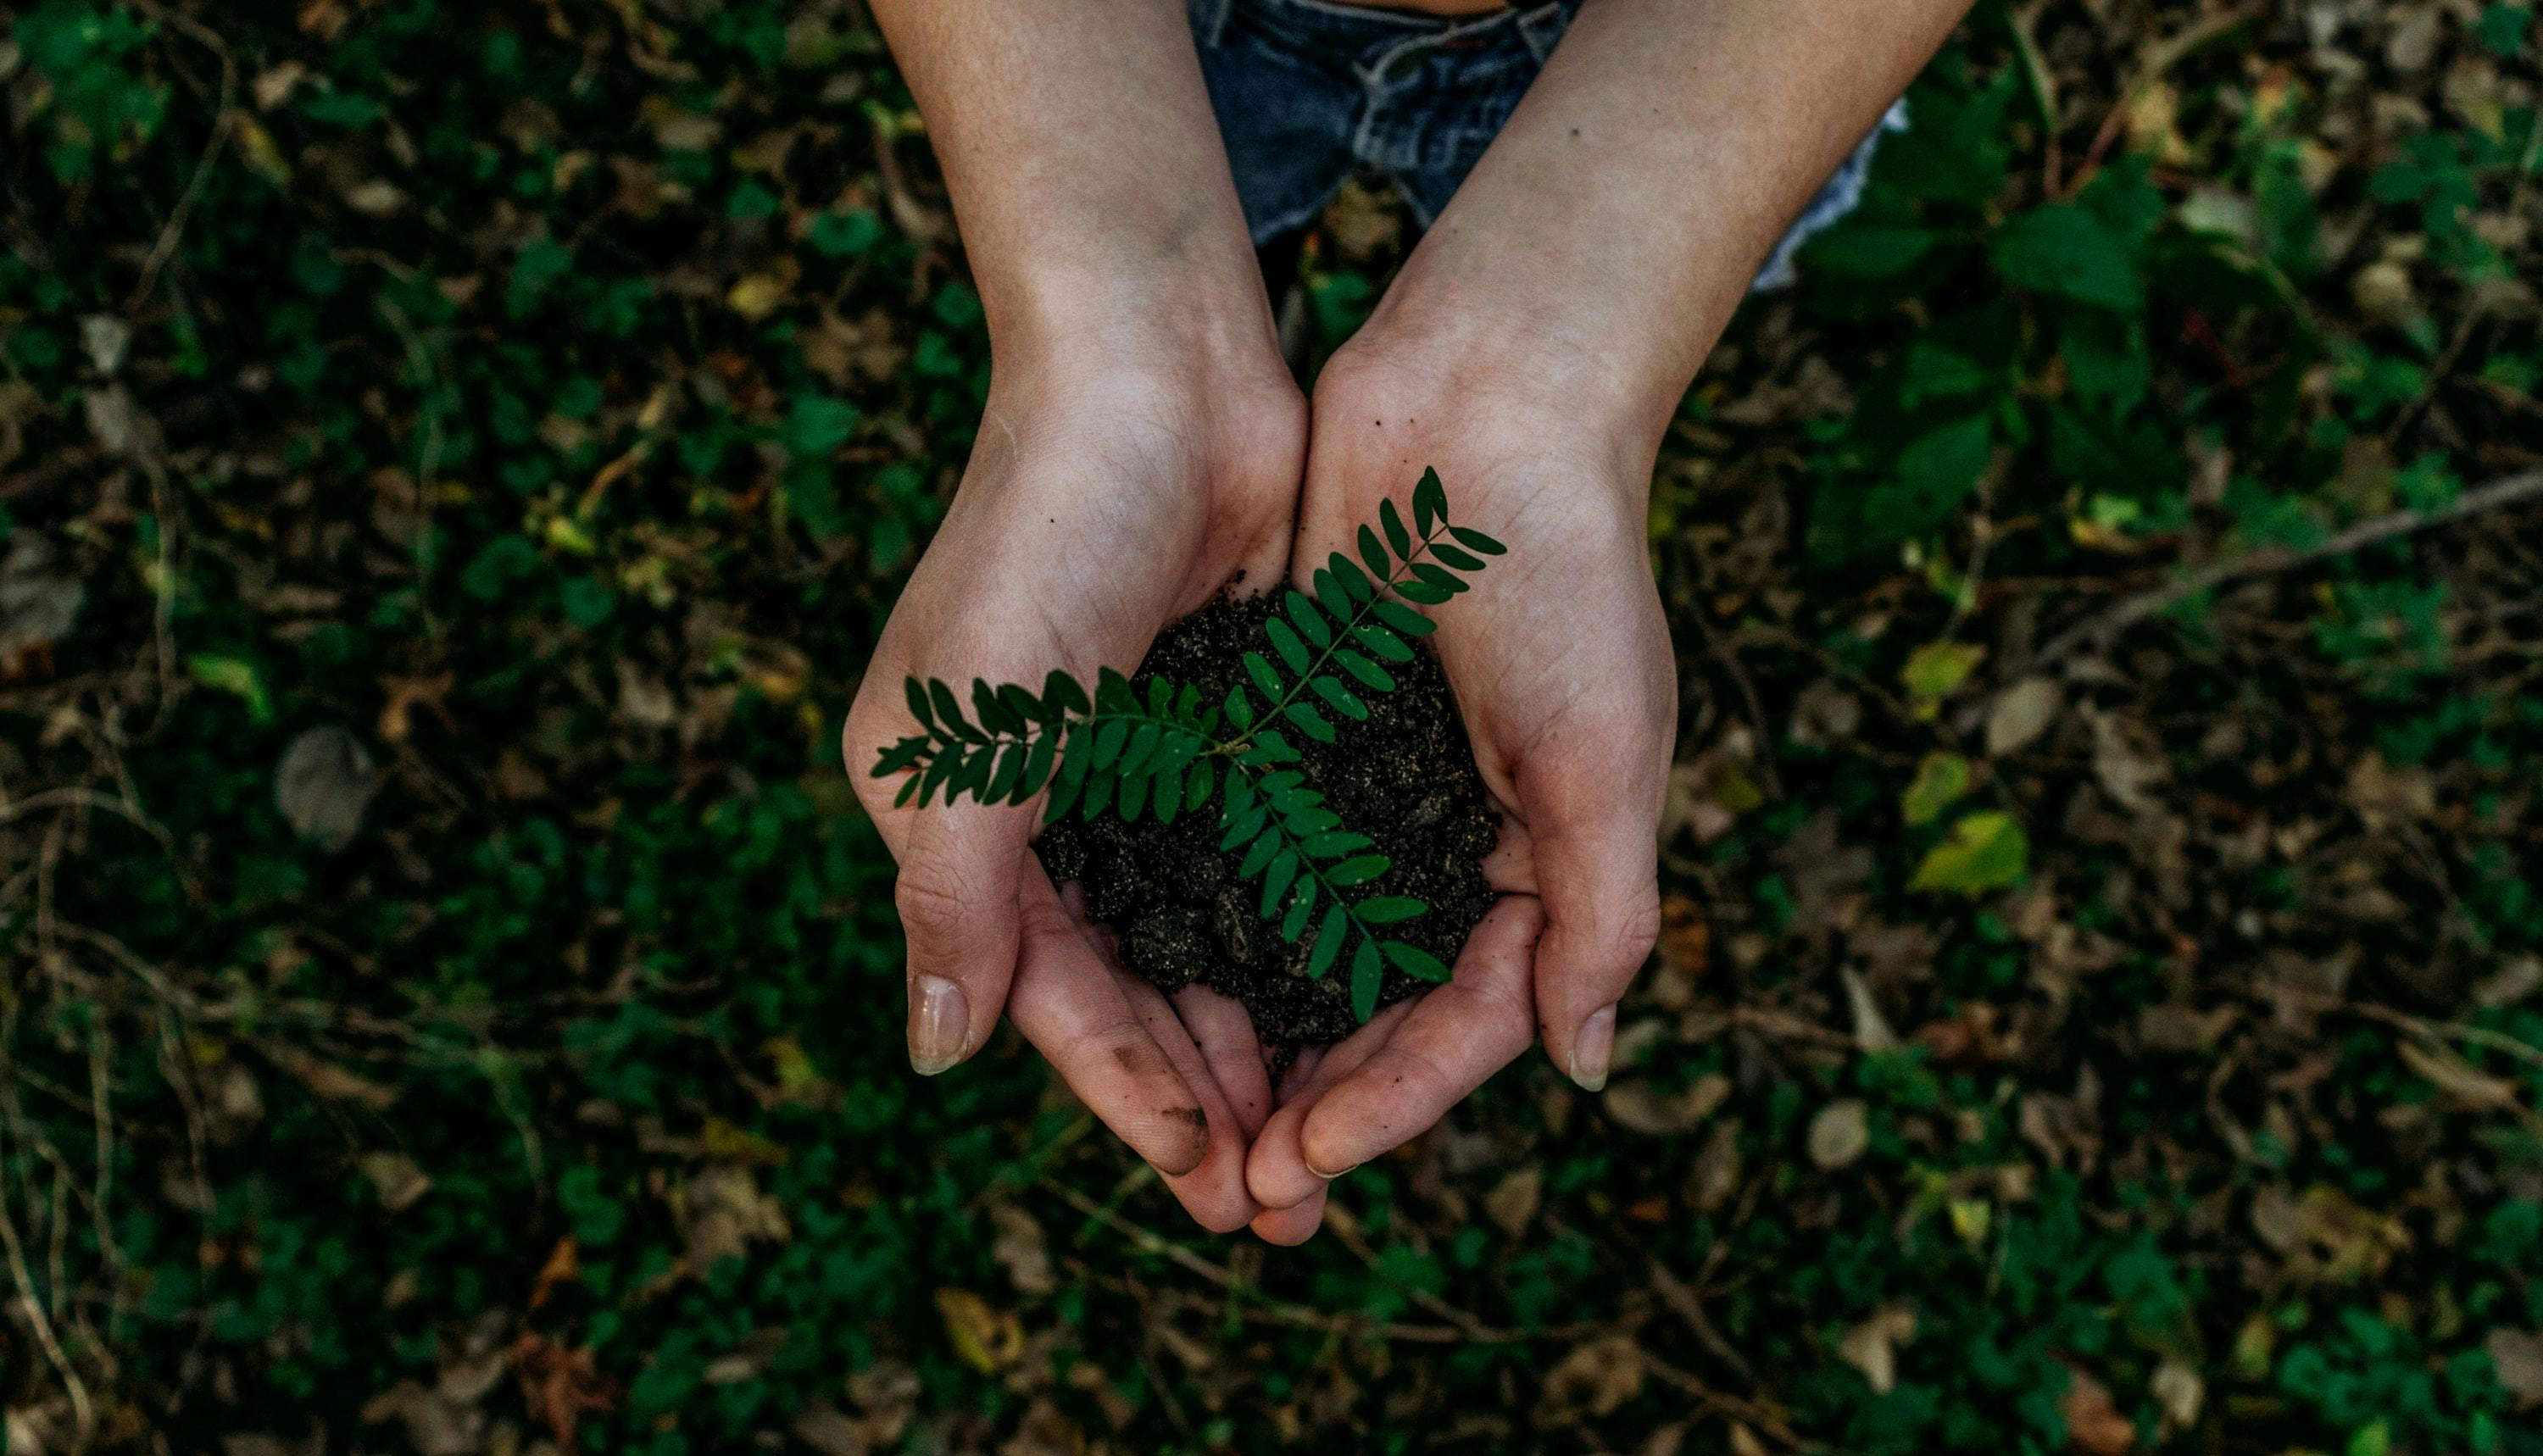 Hands clasped together holding a young plant